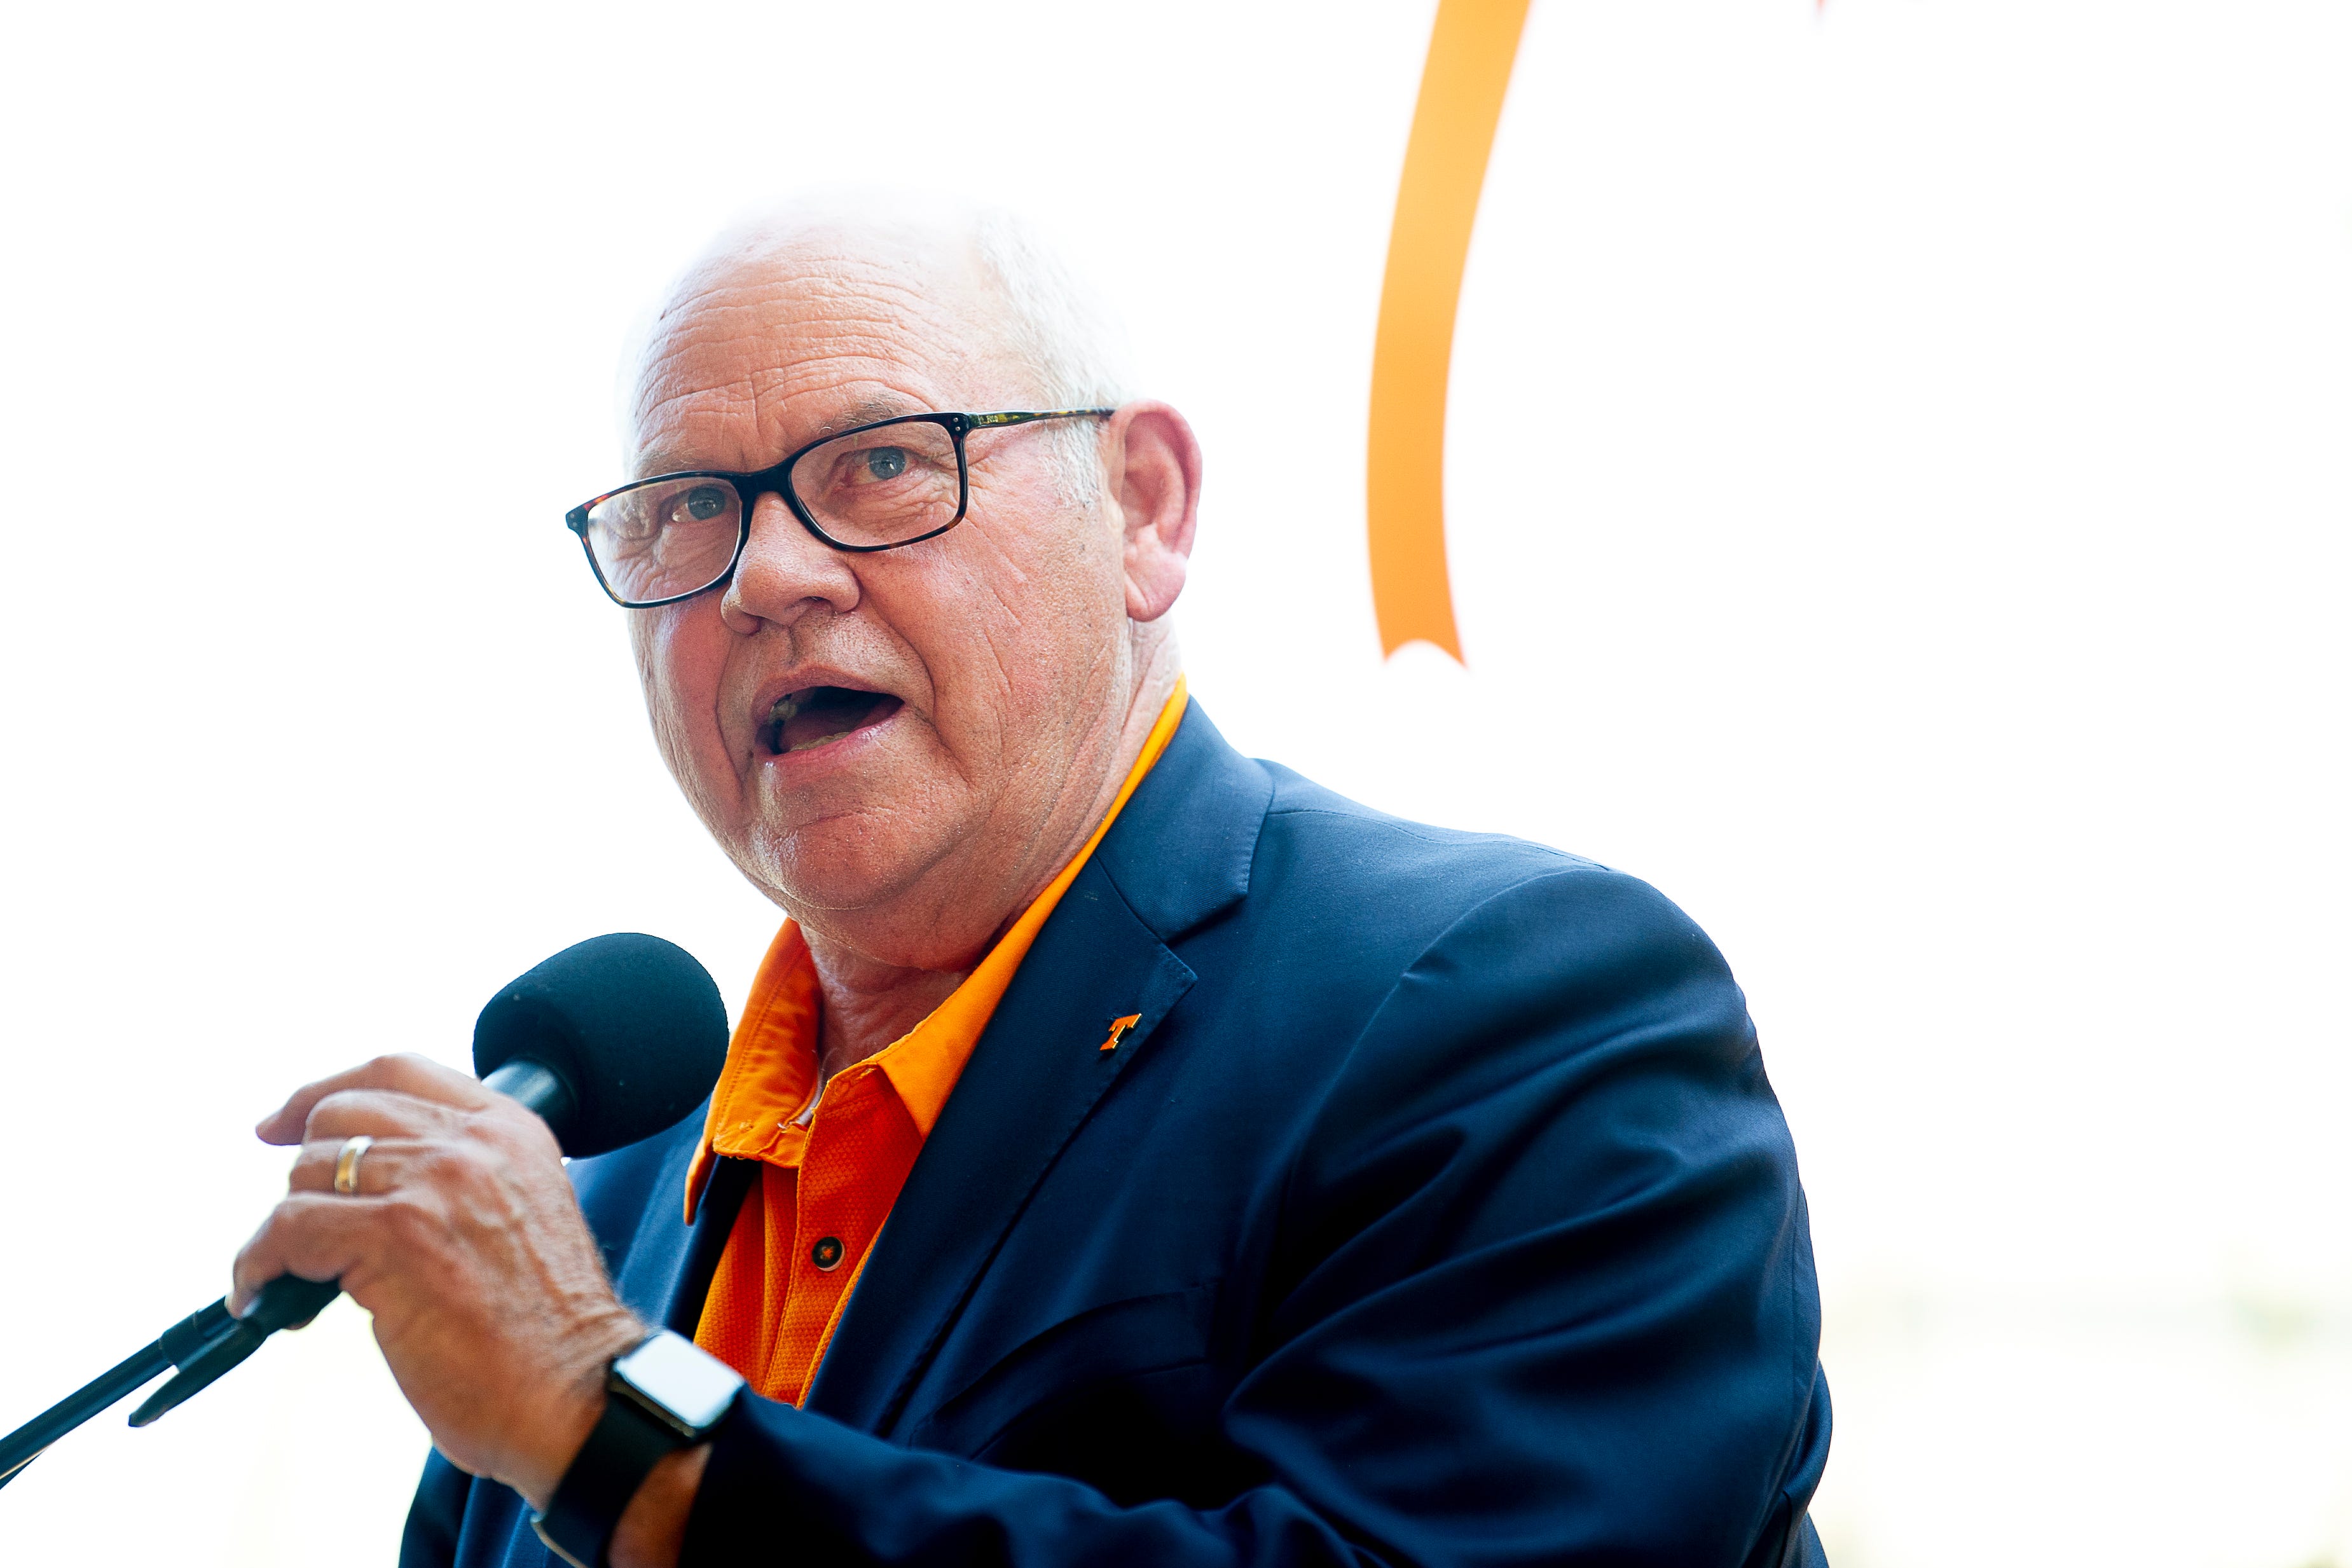 Tennessee Athletic Director Phillip Fulmer speaks during a dedication ceremony of the Doug Dickey Hall of Fame Plaza at the Neyland-Thompson Sports Complex in Knoxville, Tennessee on Friday, October 4, 2019. Dickey led UT to its second SEC title in 1969 and served as the Vols' Director of Athletics from 1986 to 2003.